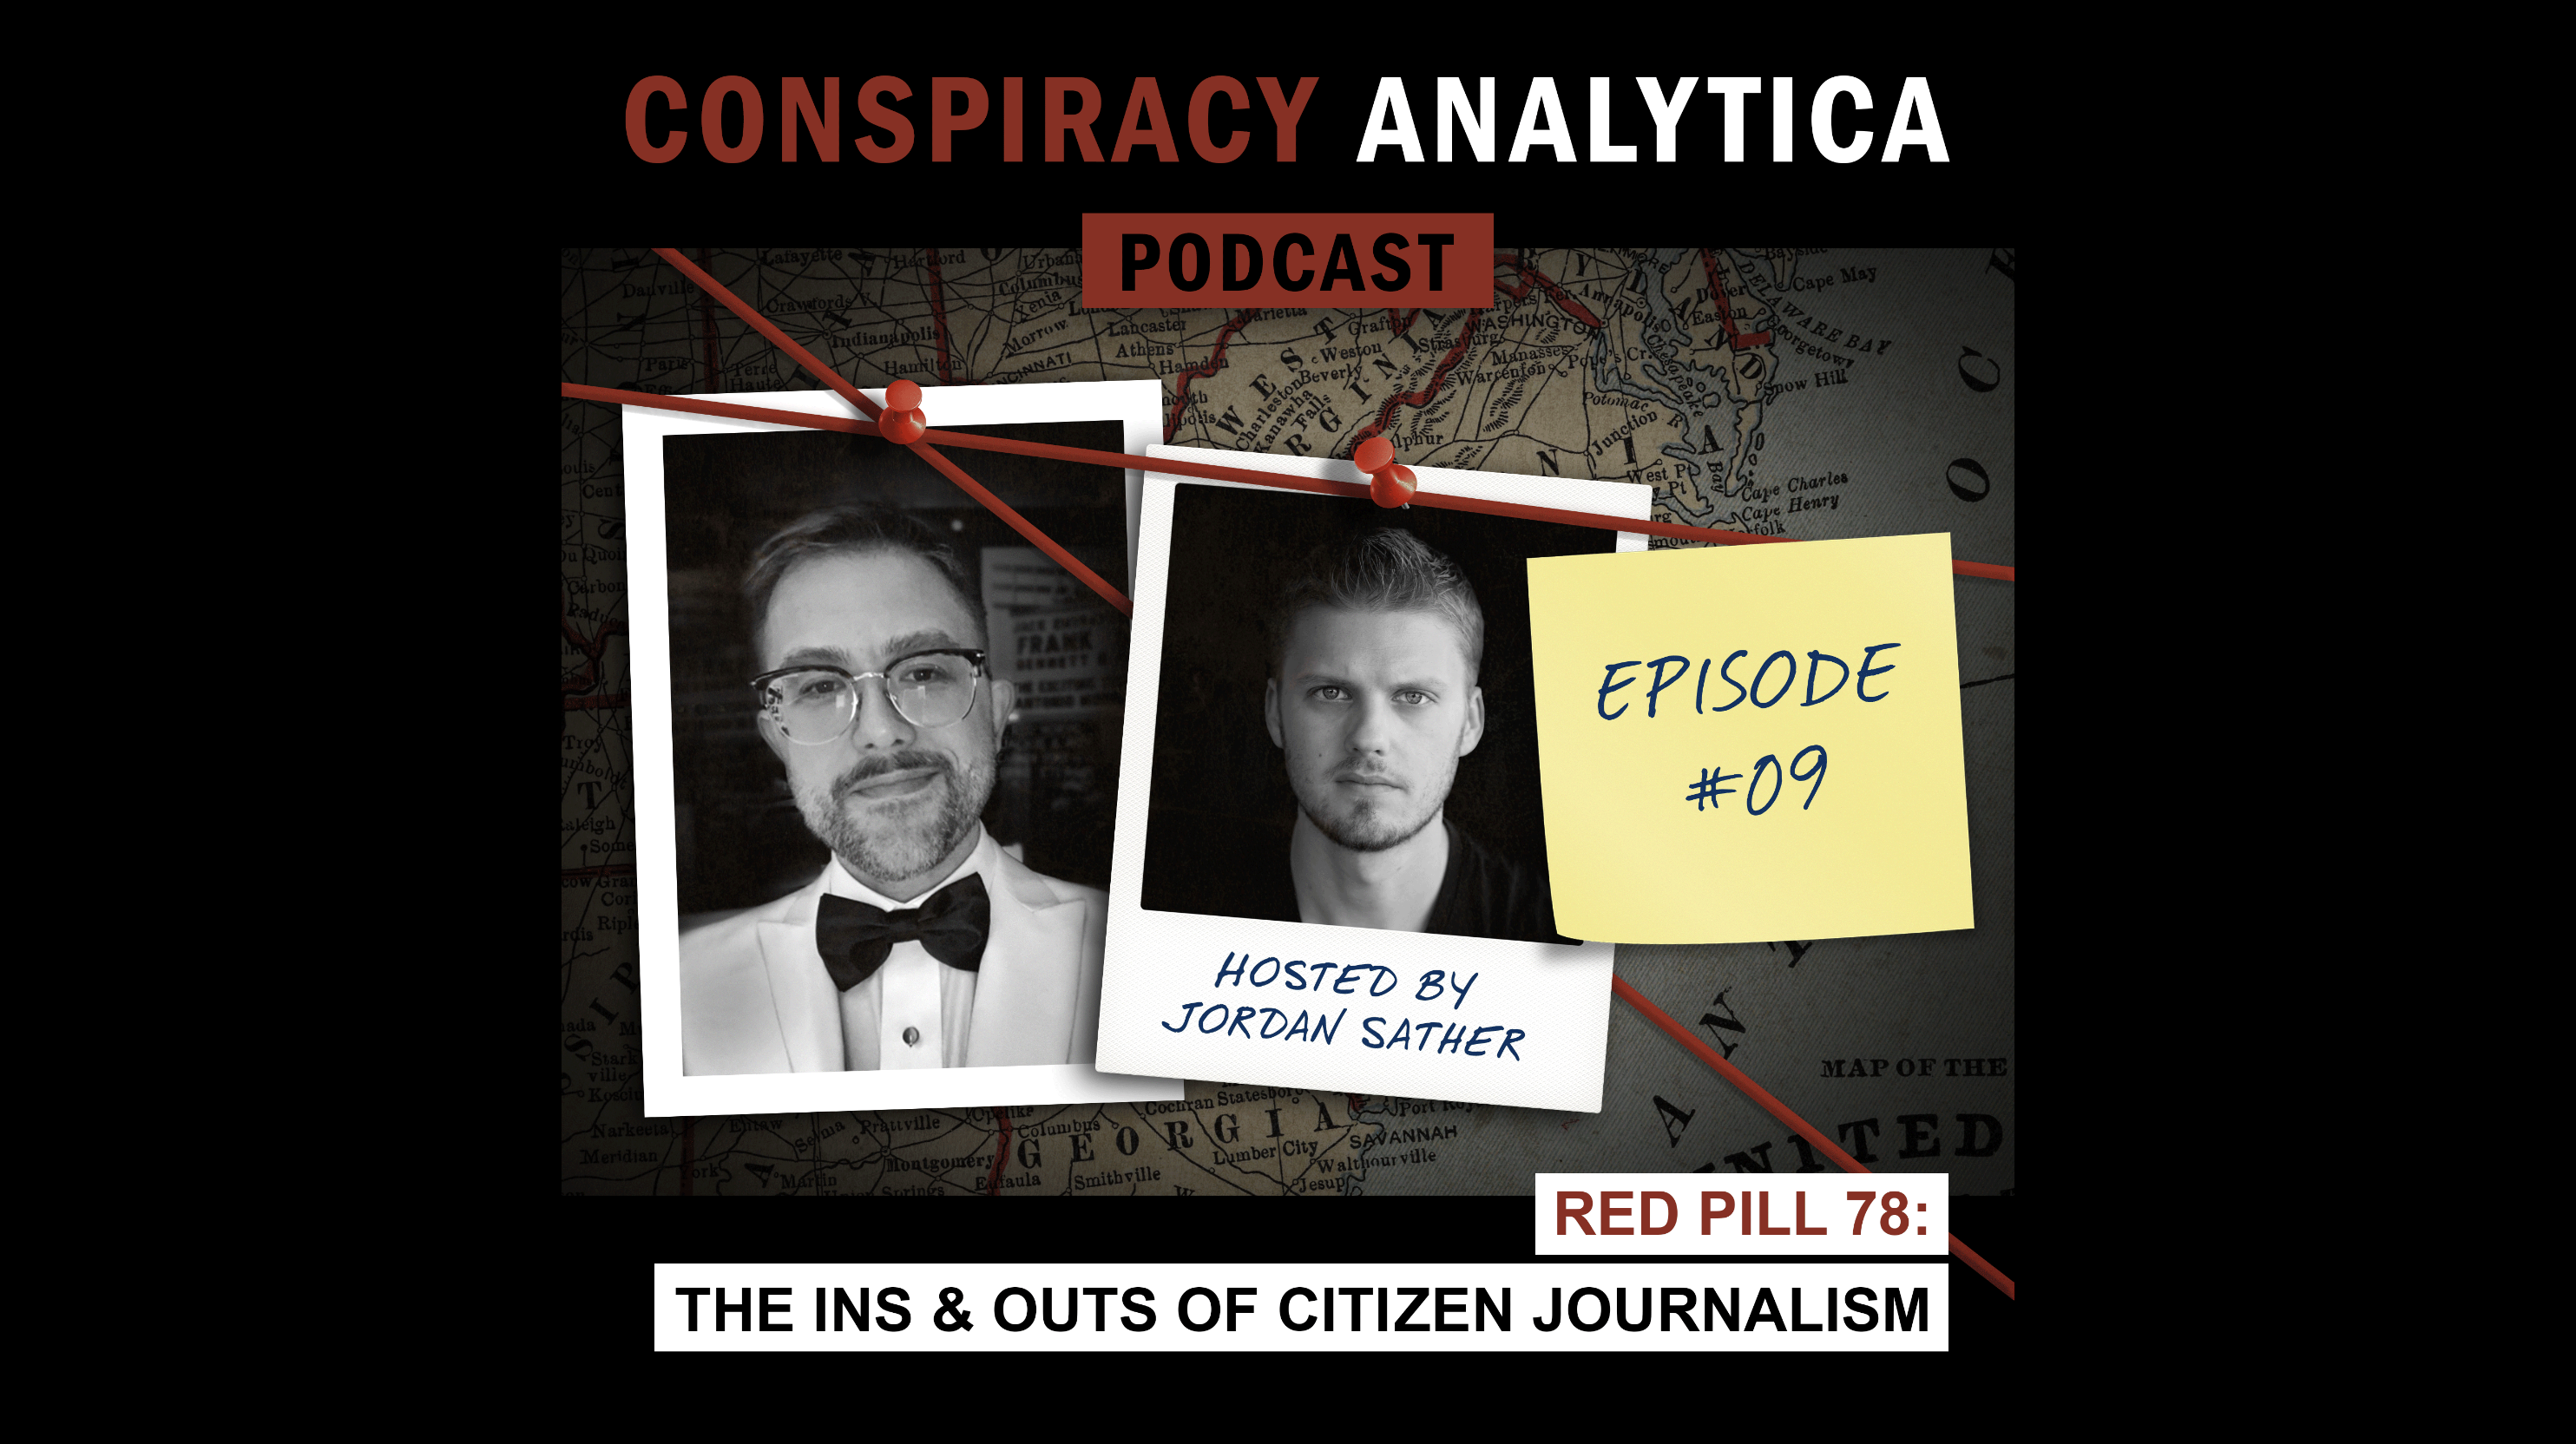 The Ins & Outs of Citizen Journalism w/ Redpill78 (Ep. 09)